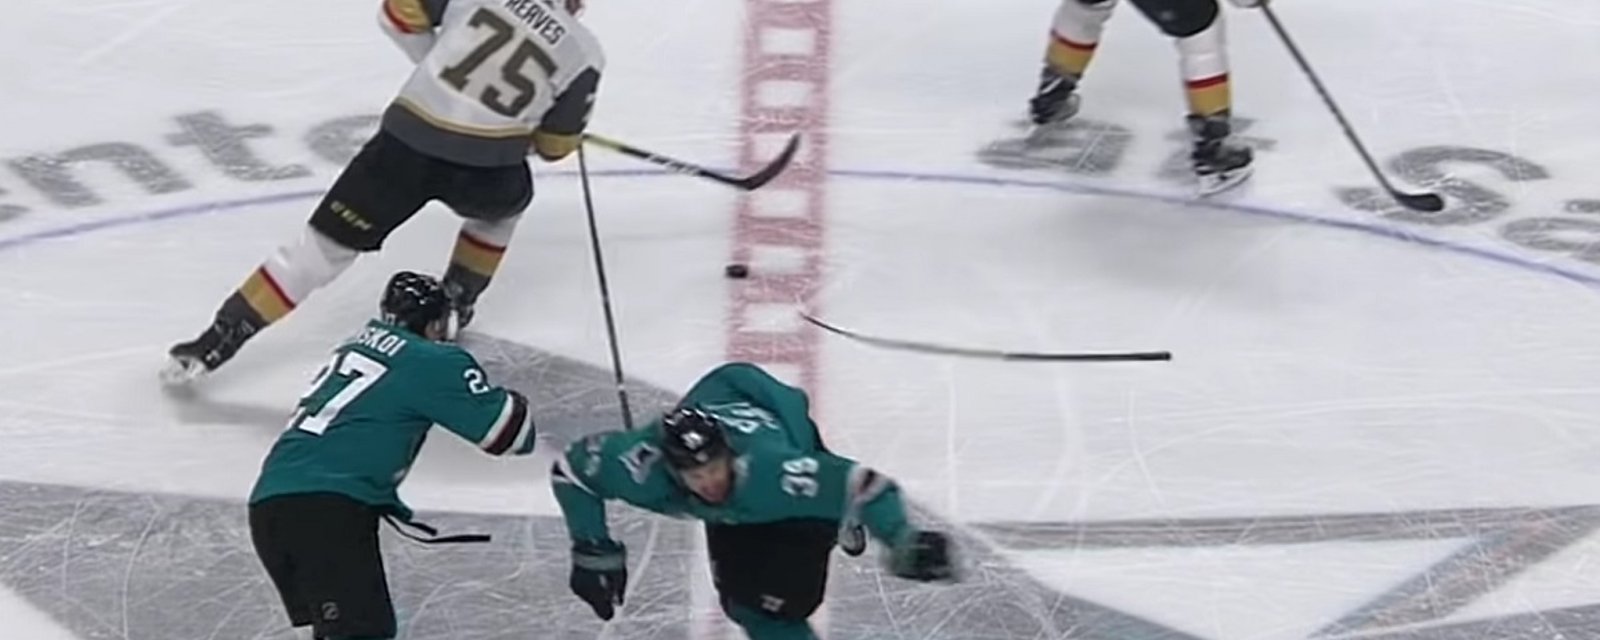 Donskoi levels his own teammate after Reaves slips away from his body check.